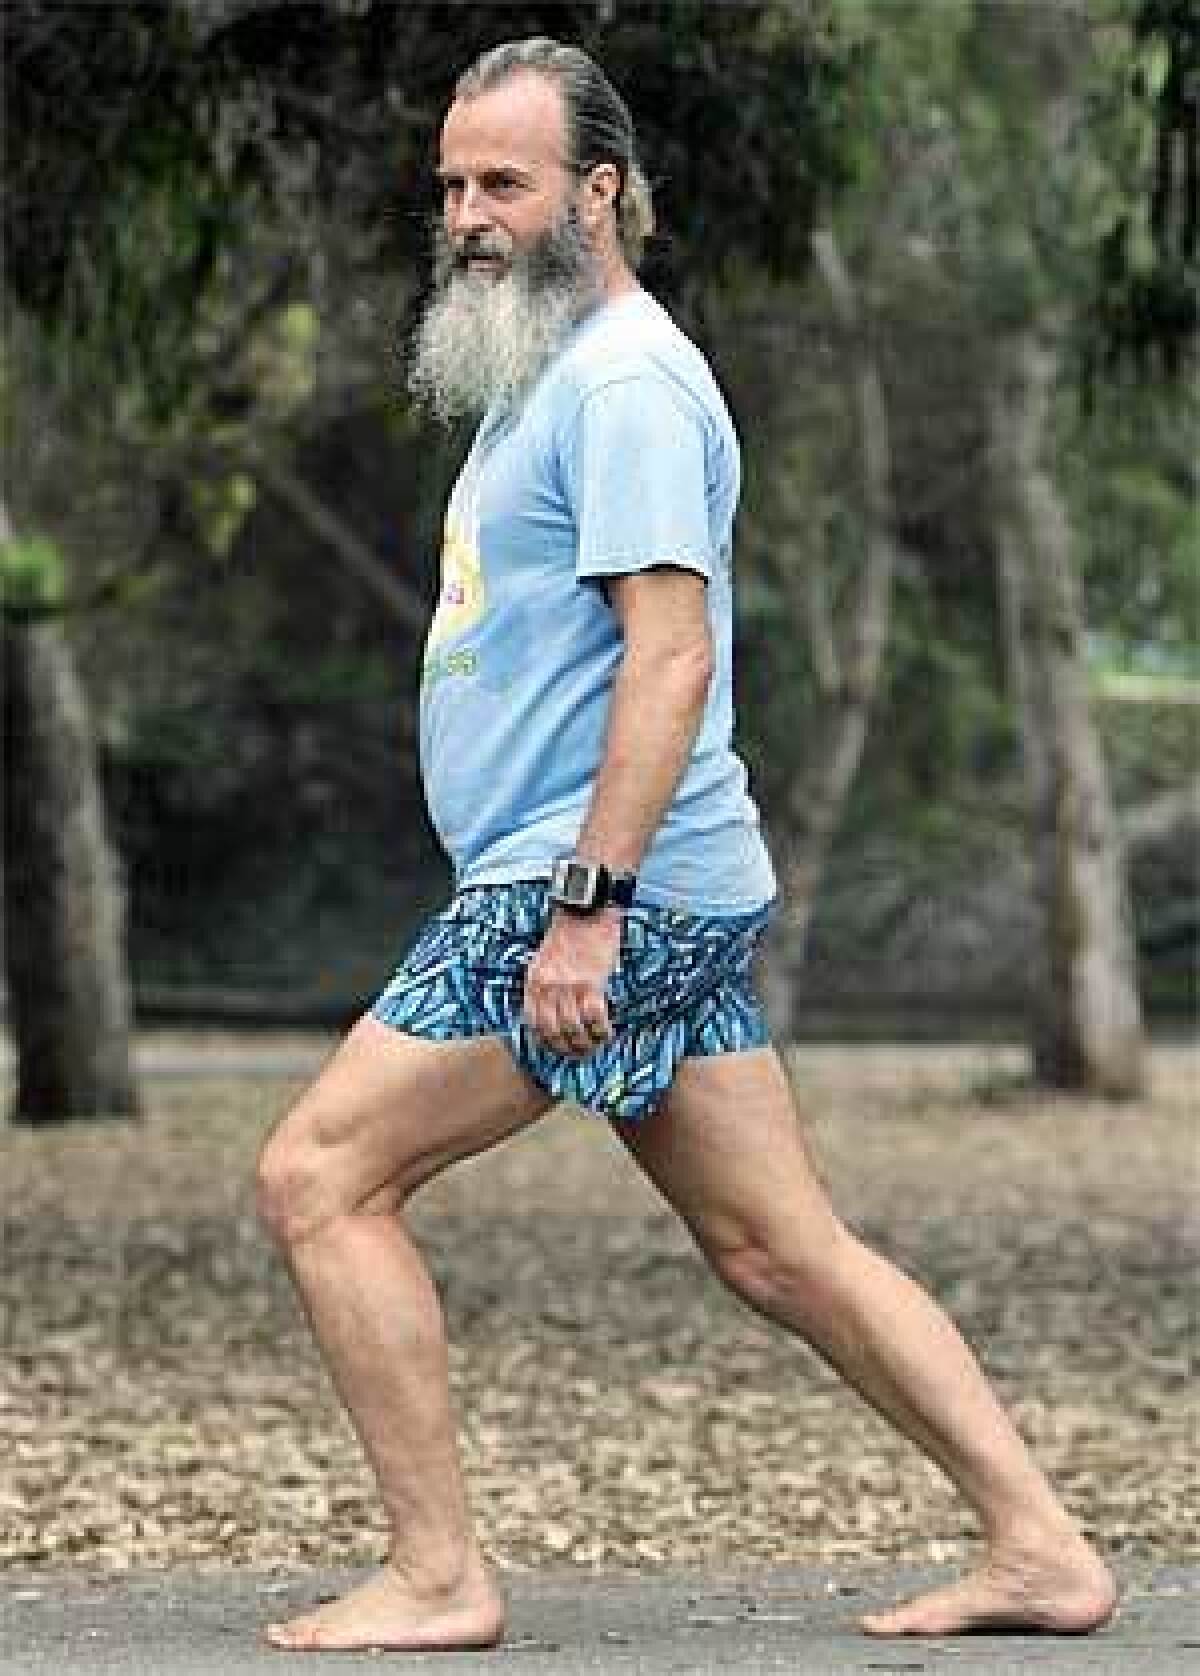 Instructor Ken Saxton demonstrates proper barefoot running posture: vertical back, bent knees and as large part as possible of the foot's surface touching the ground, after a barefoot running clinic in Huntington Beach.